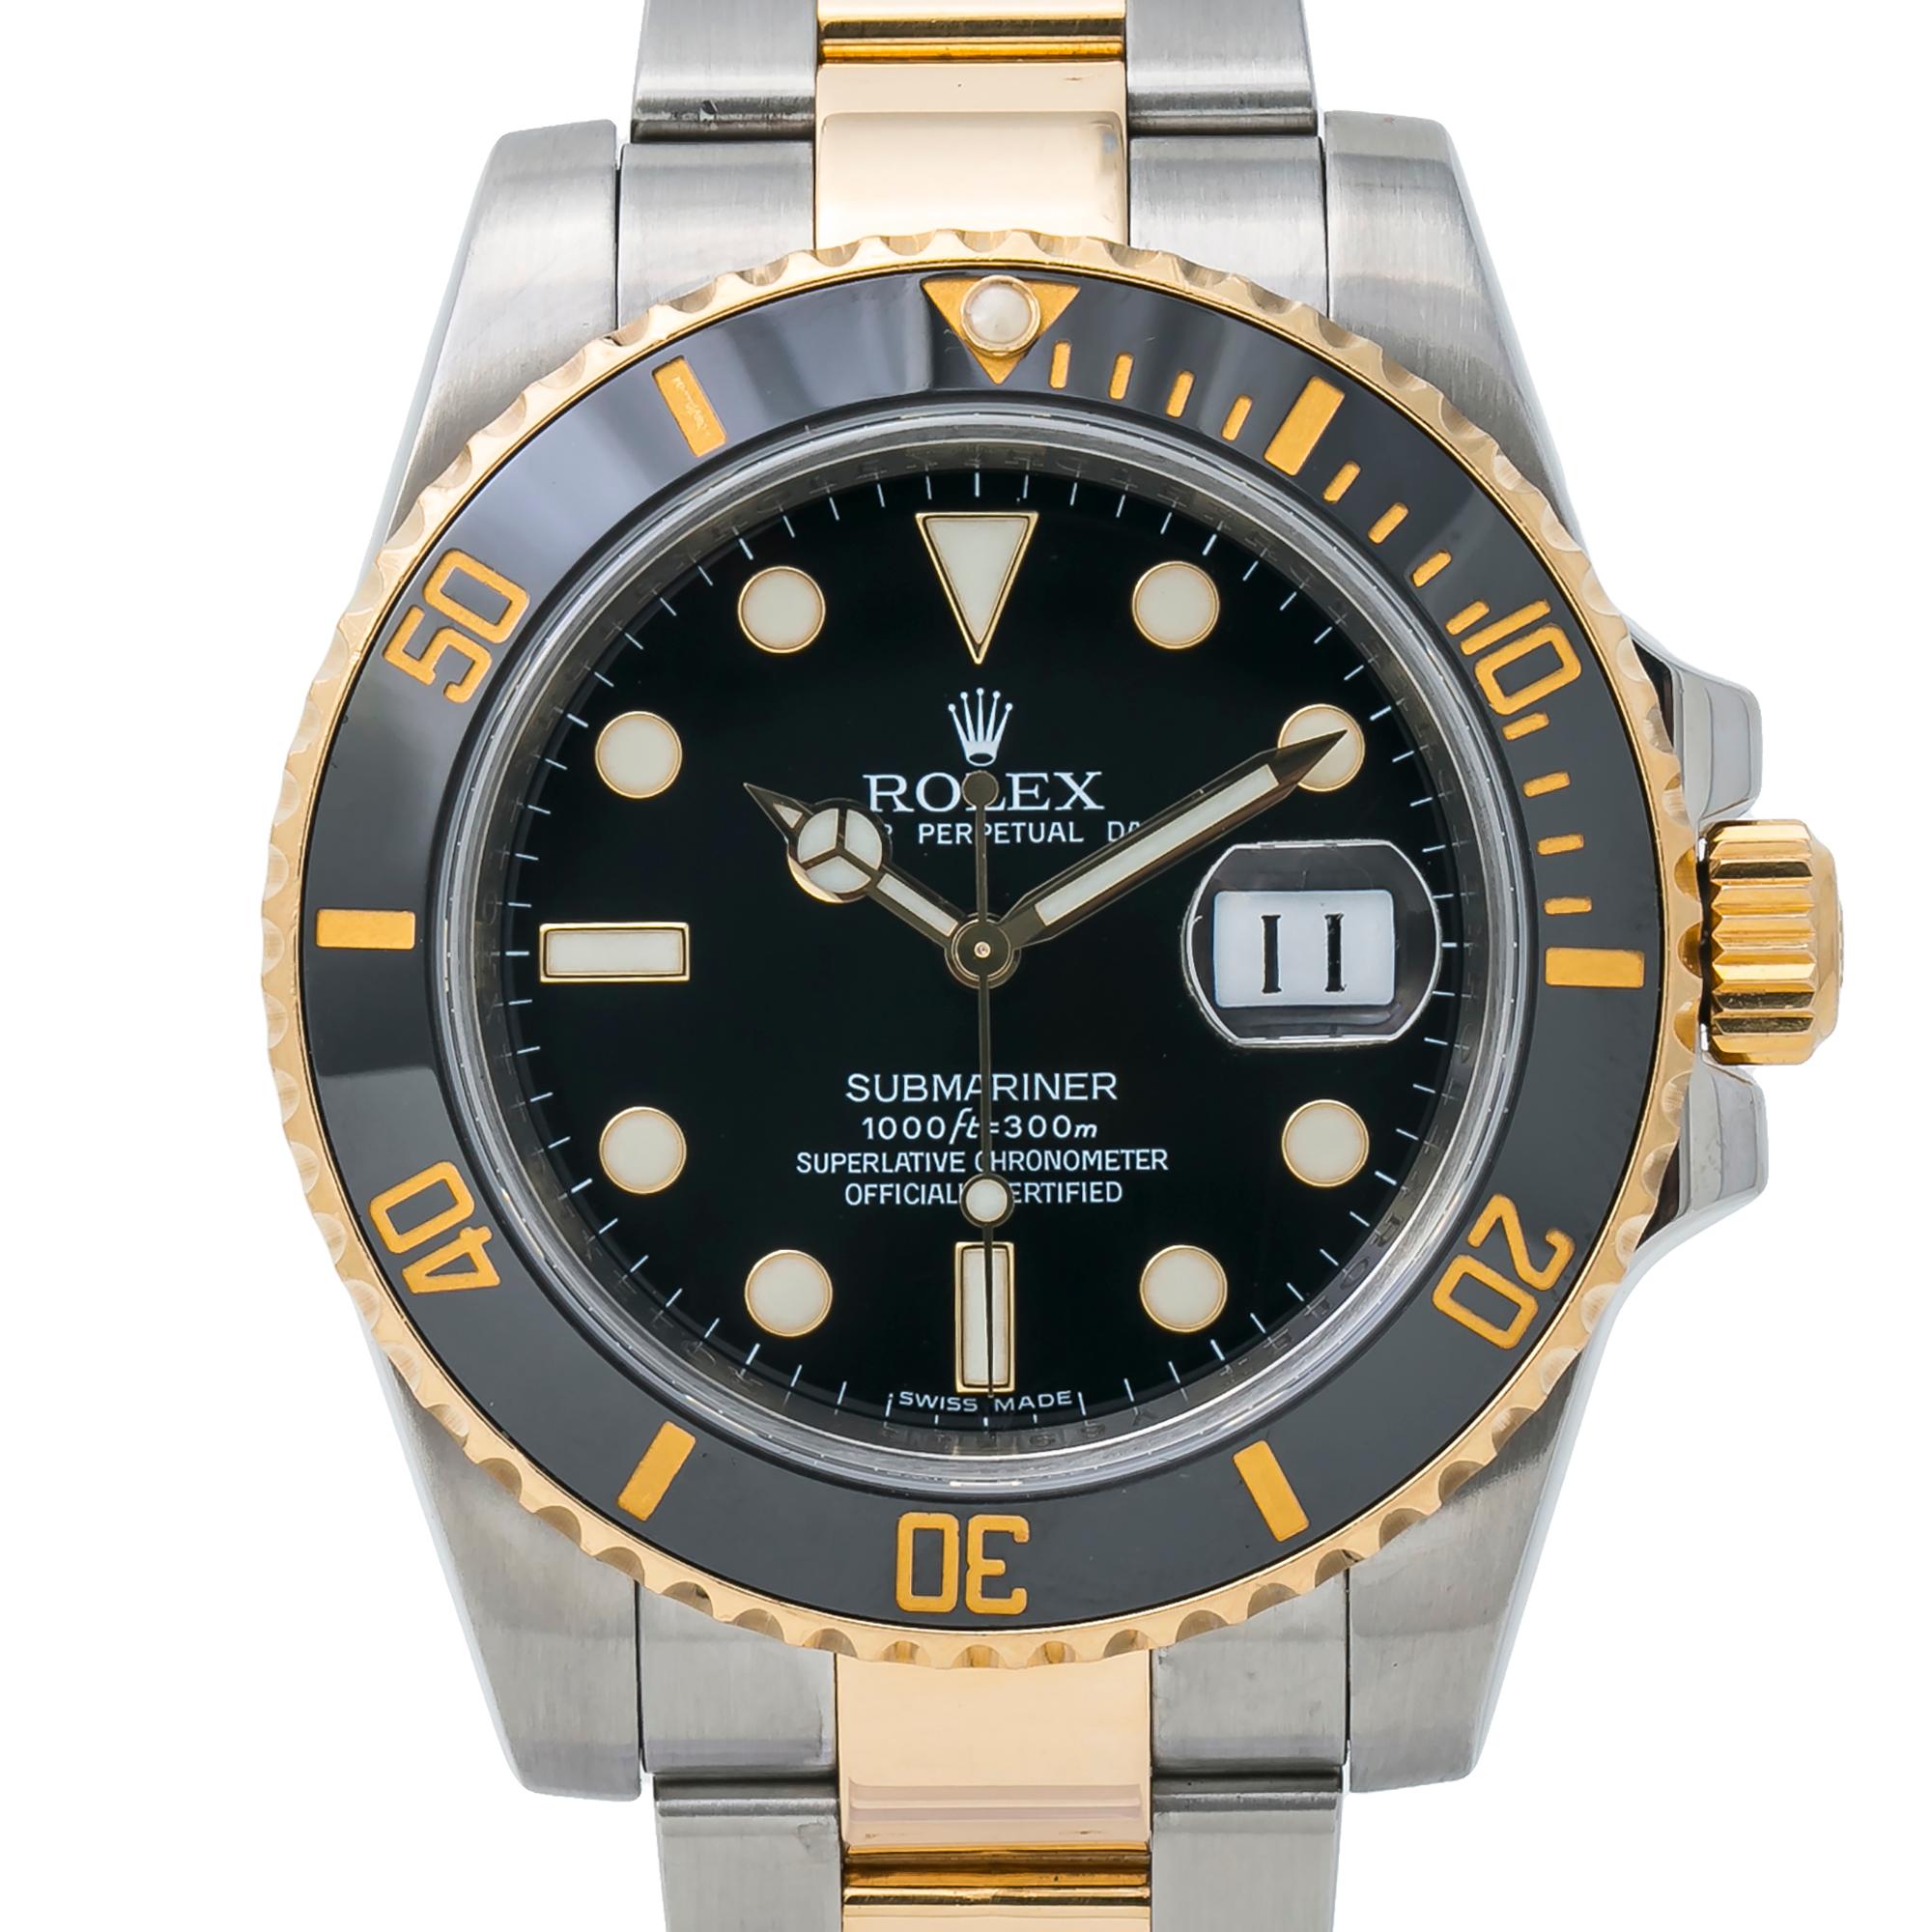 Rolex Submariner 116613 18K Two Tone Automatic Mens Watch 40mm Box & Card 2011